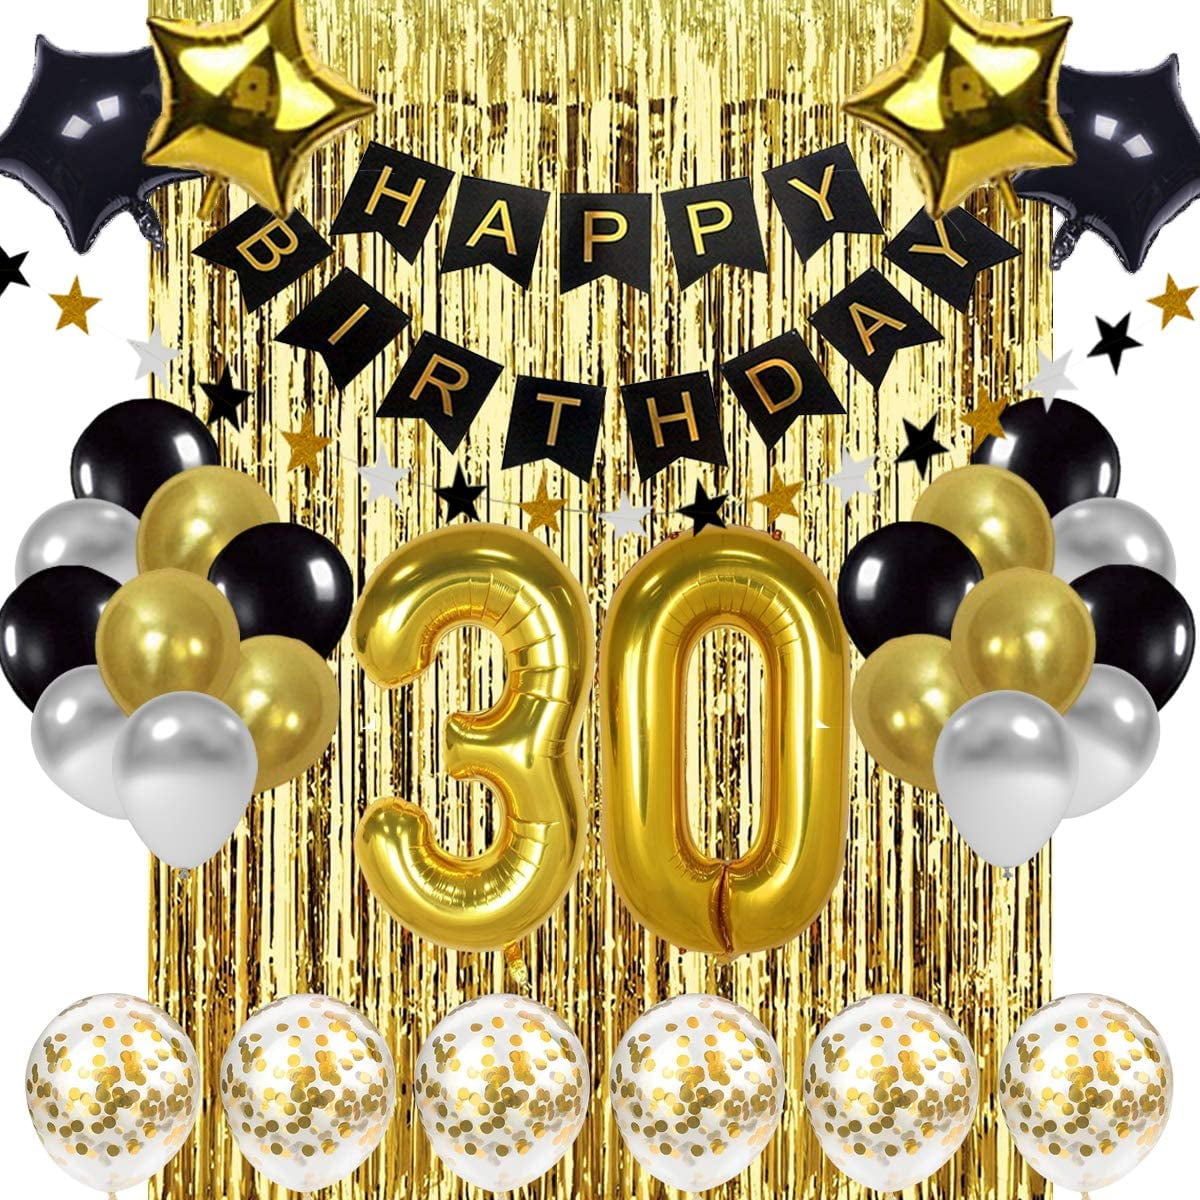 Black and Gold Happy Birthday Banner 30th Gold Number Balloons Star Bottle Champagne Foil Balloons Triangular Garland Hanging Swirls for 30th Years Old Party Supplies Zerodeco Birthday Decorations